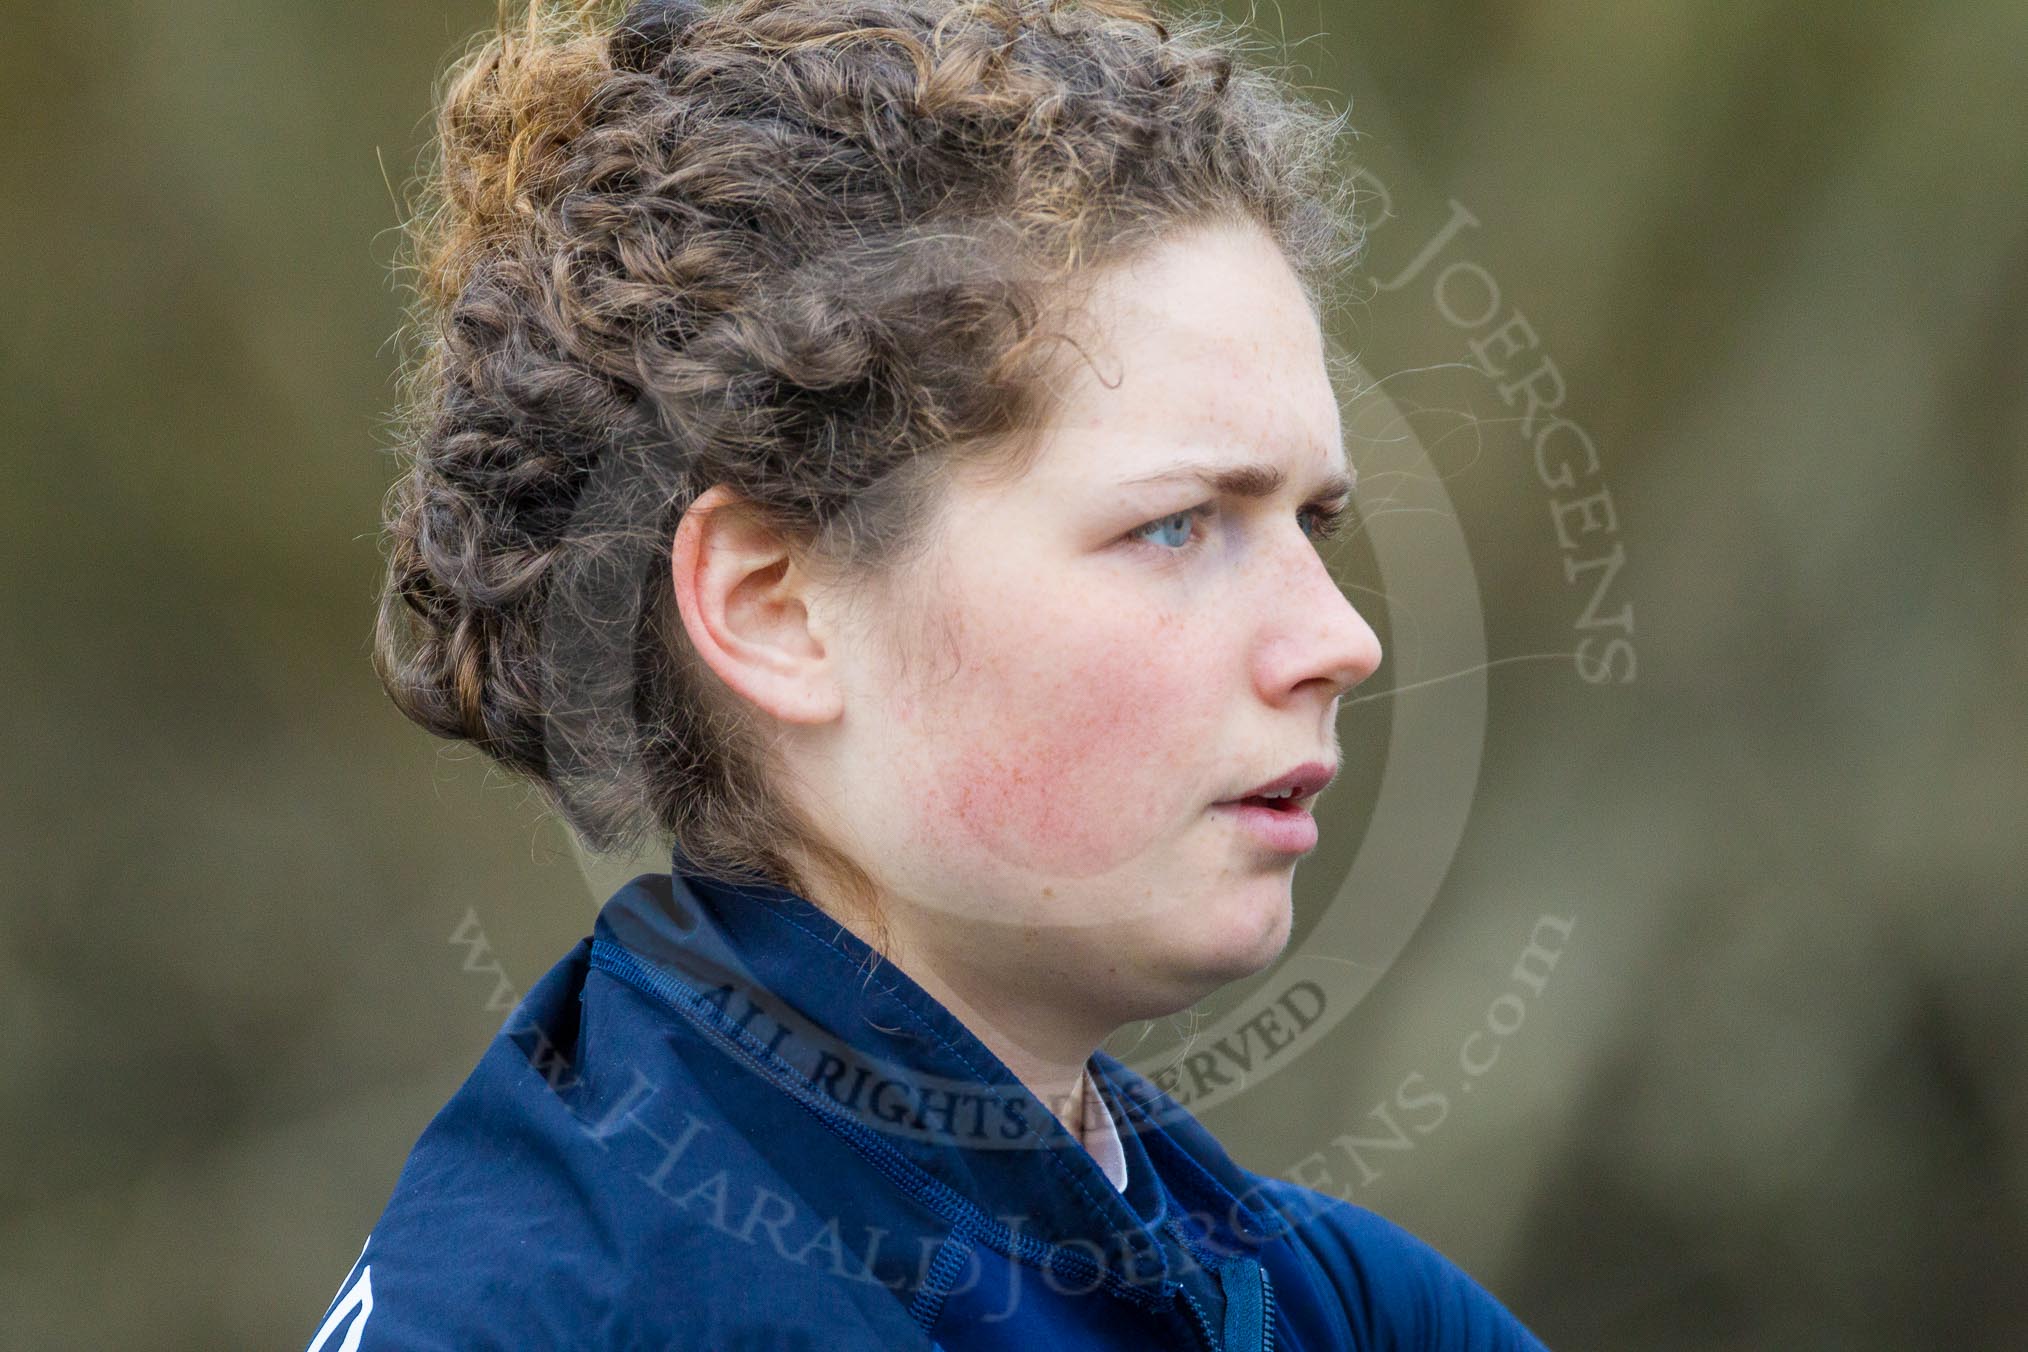 The Boat Race season 2016 - OUWBC training Wallingford: Dutch rower Joanne Jansen, 3 seat in the OUWBC Blue Boat.
River Thames,
Wallingford,
Oxfordshire,

on 29 February 2016 at 16:02, image #81